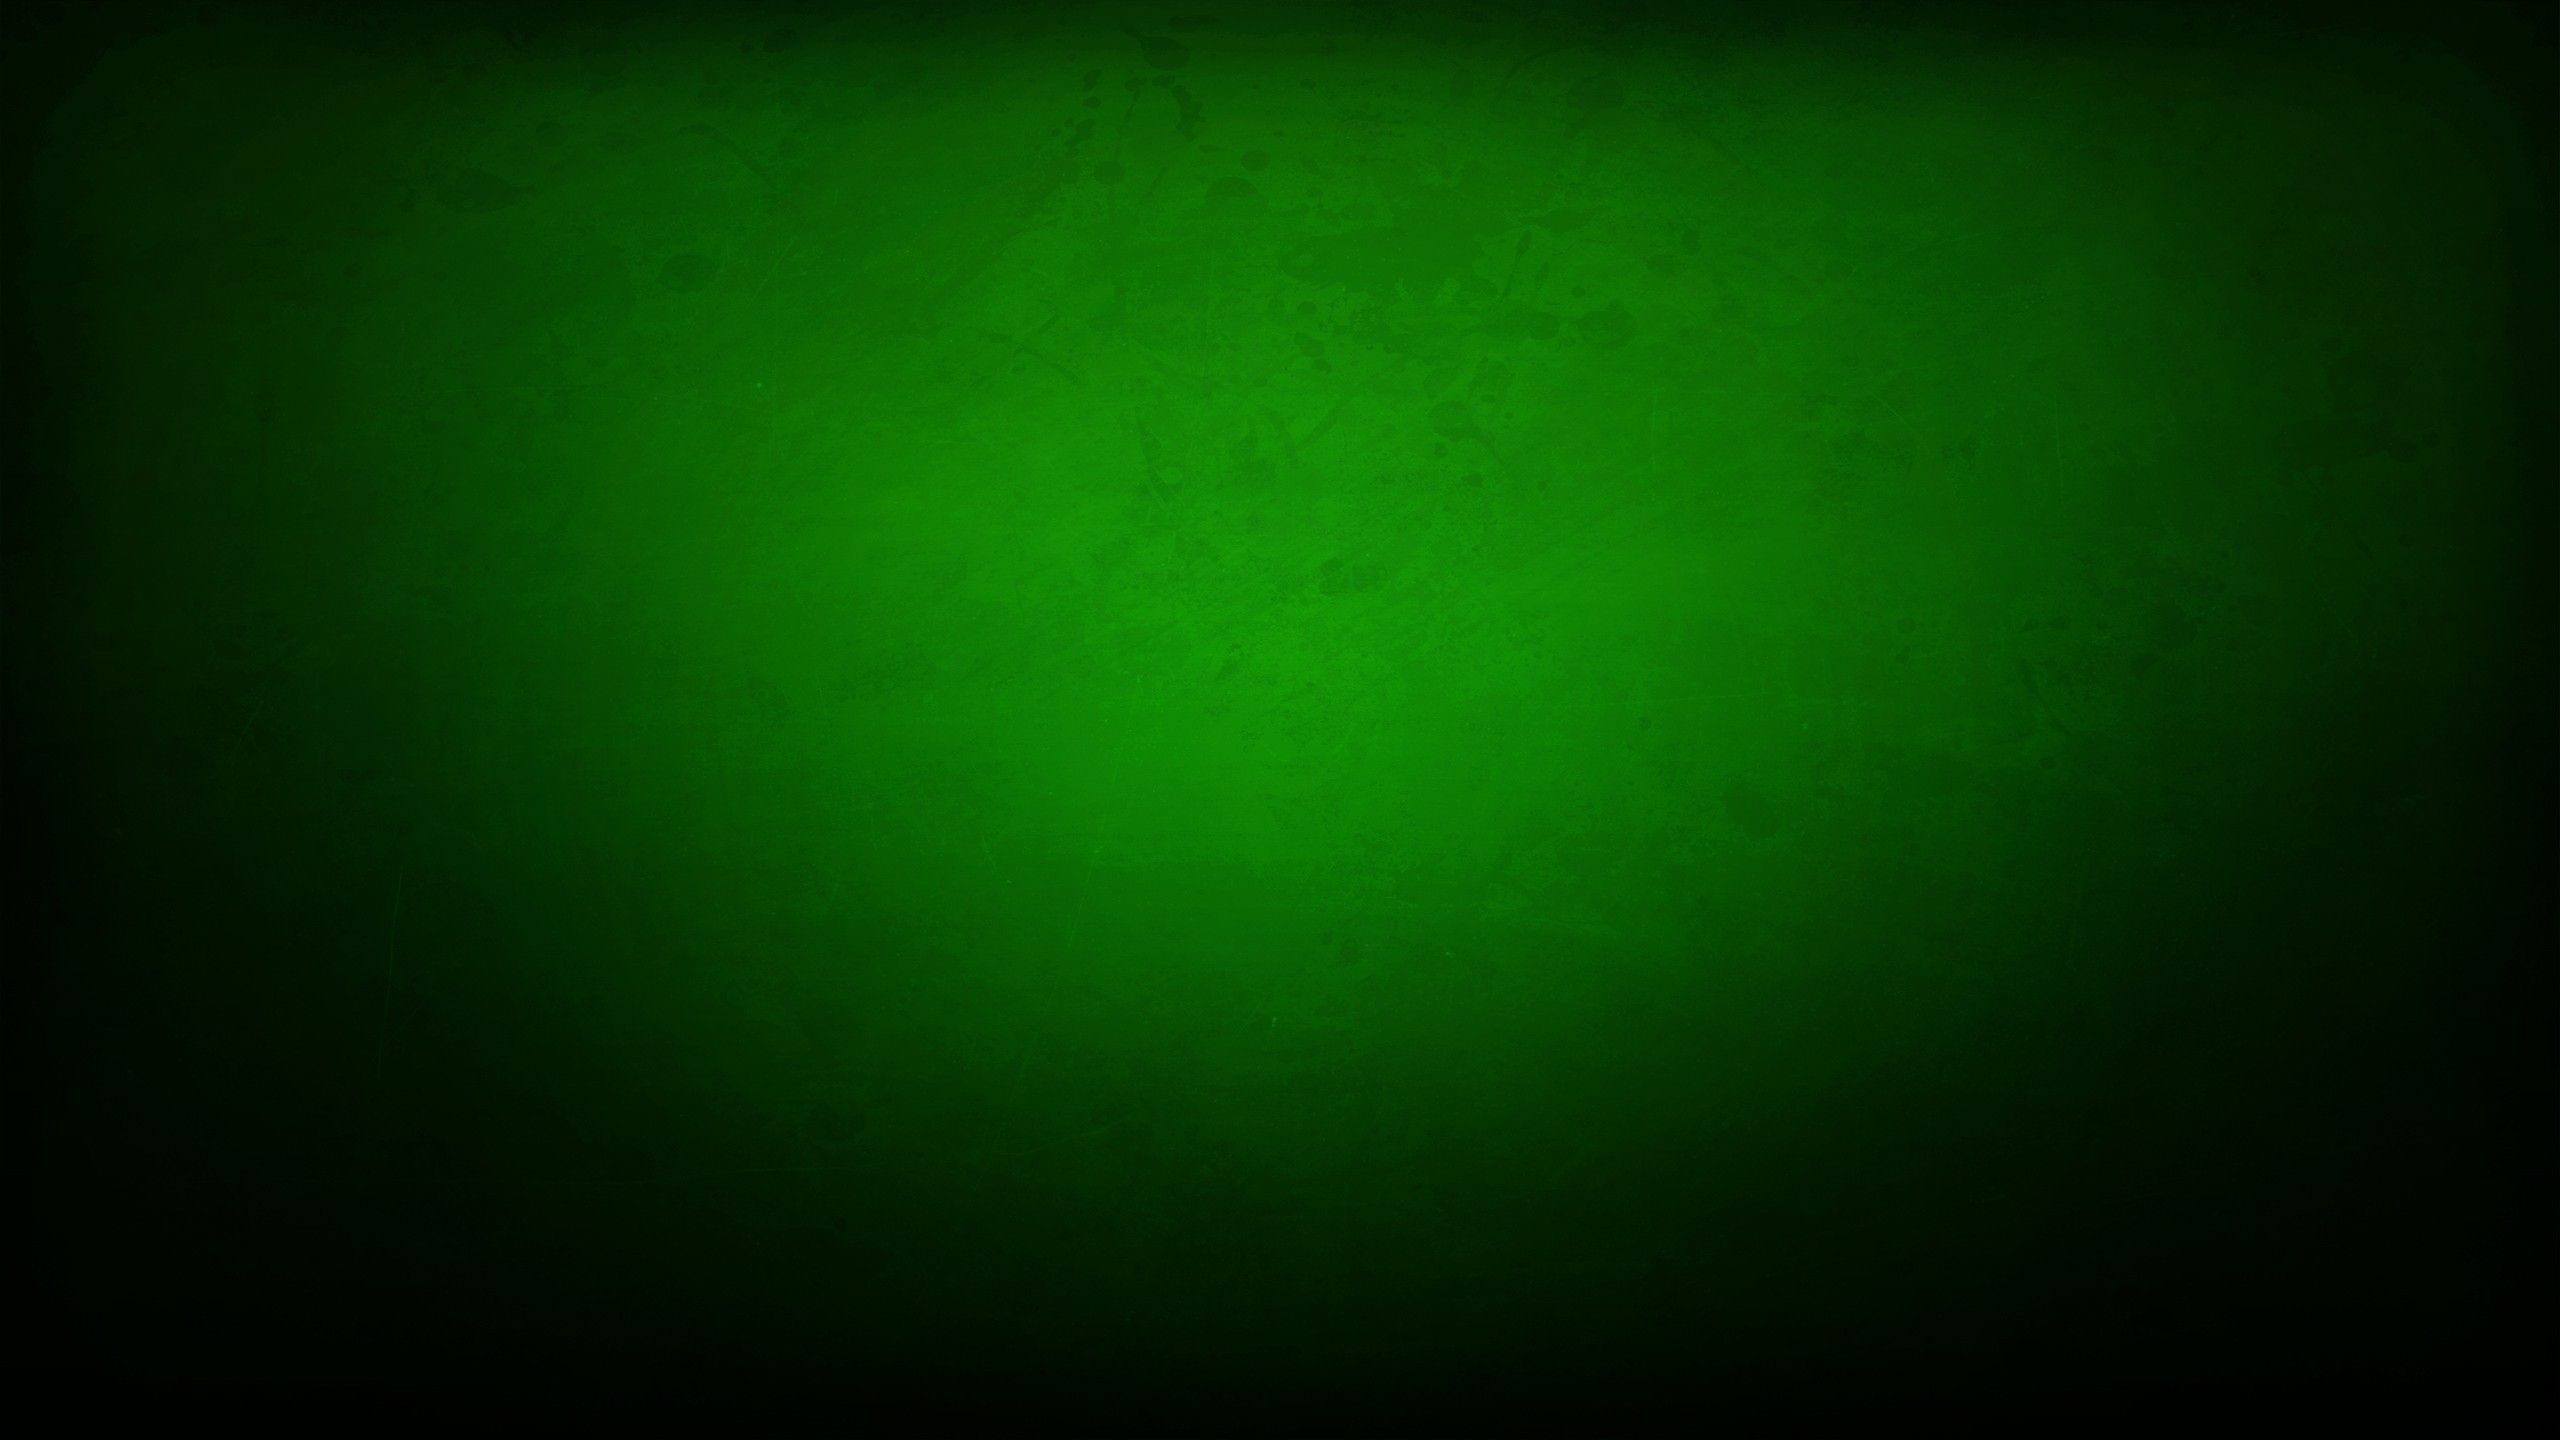 2560x1440 ... Free Grunge Watercolor Stock Background Images Â» Backgrounds Etc Dark  Green ...